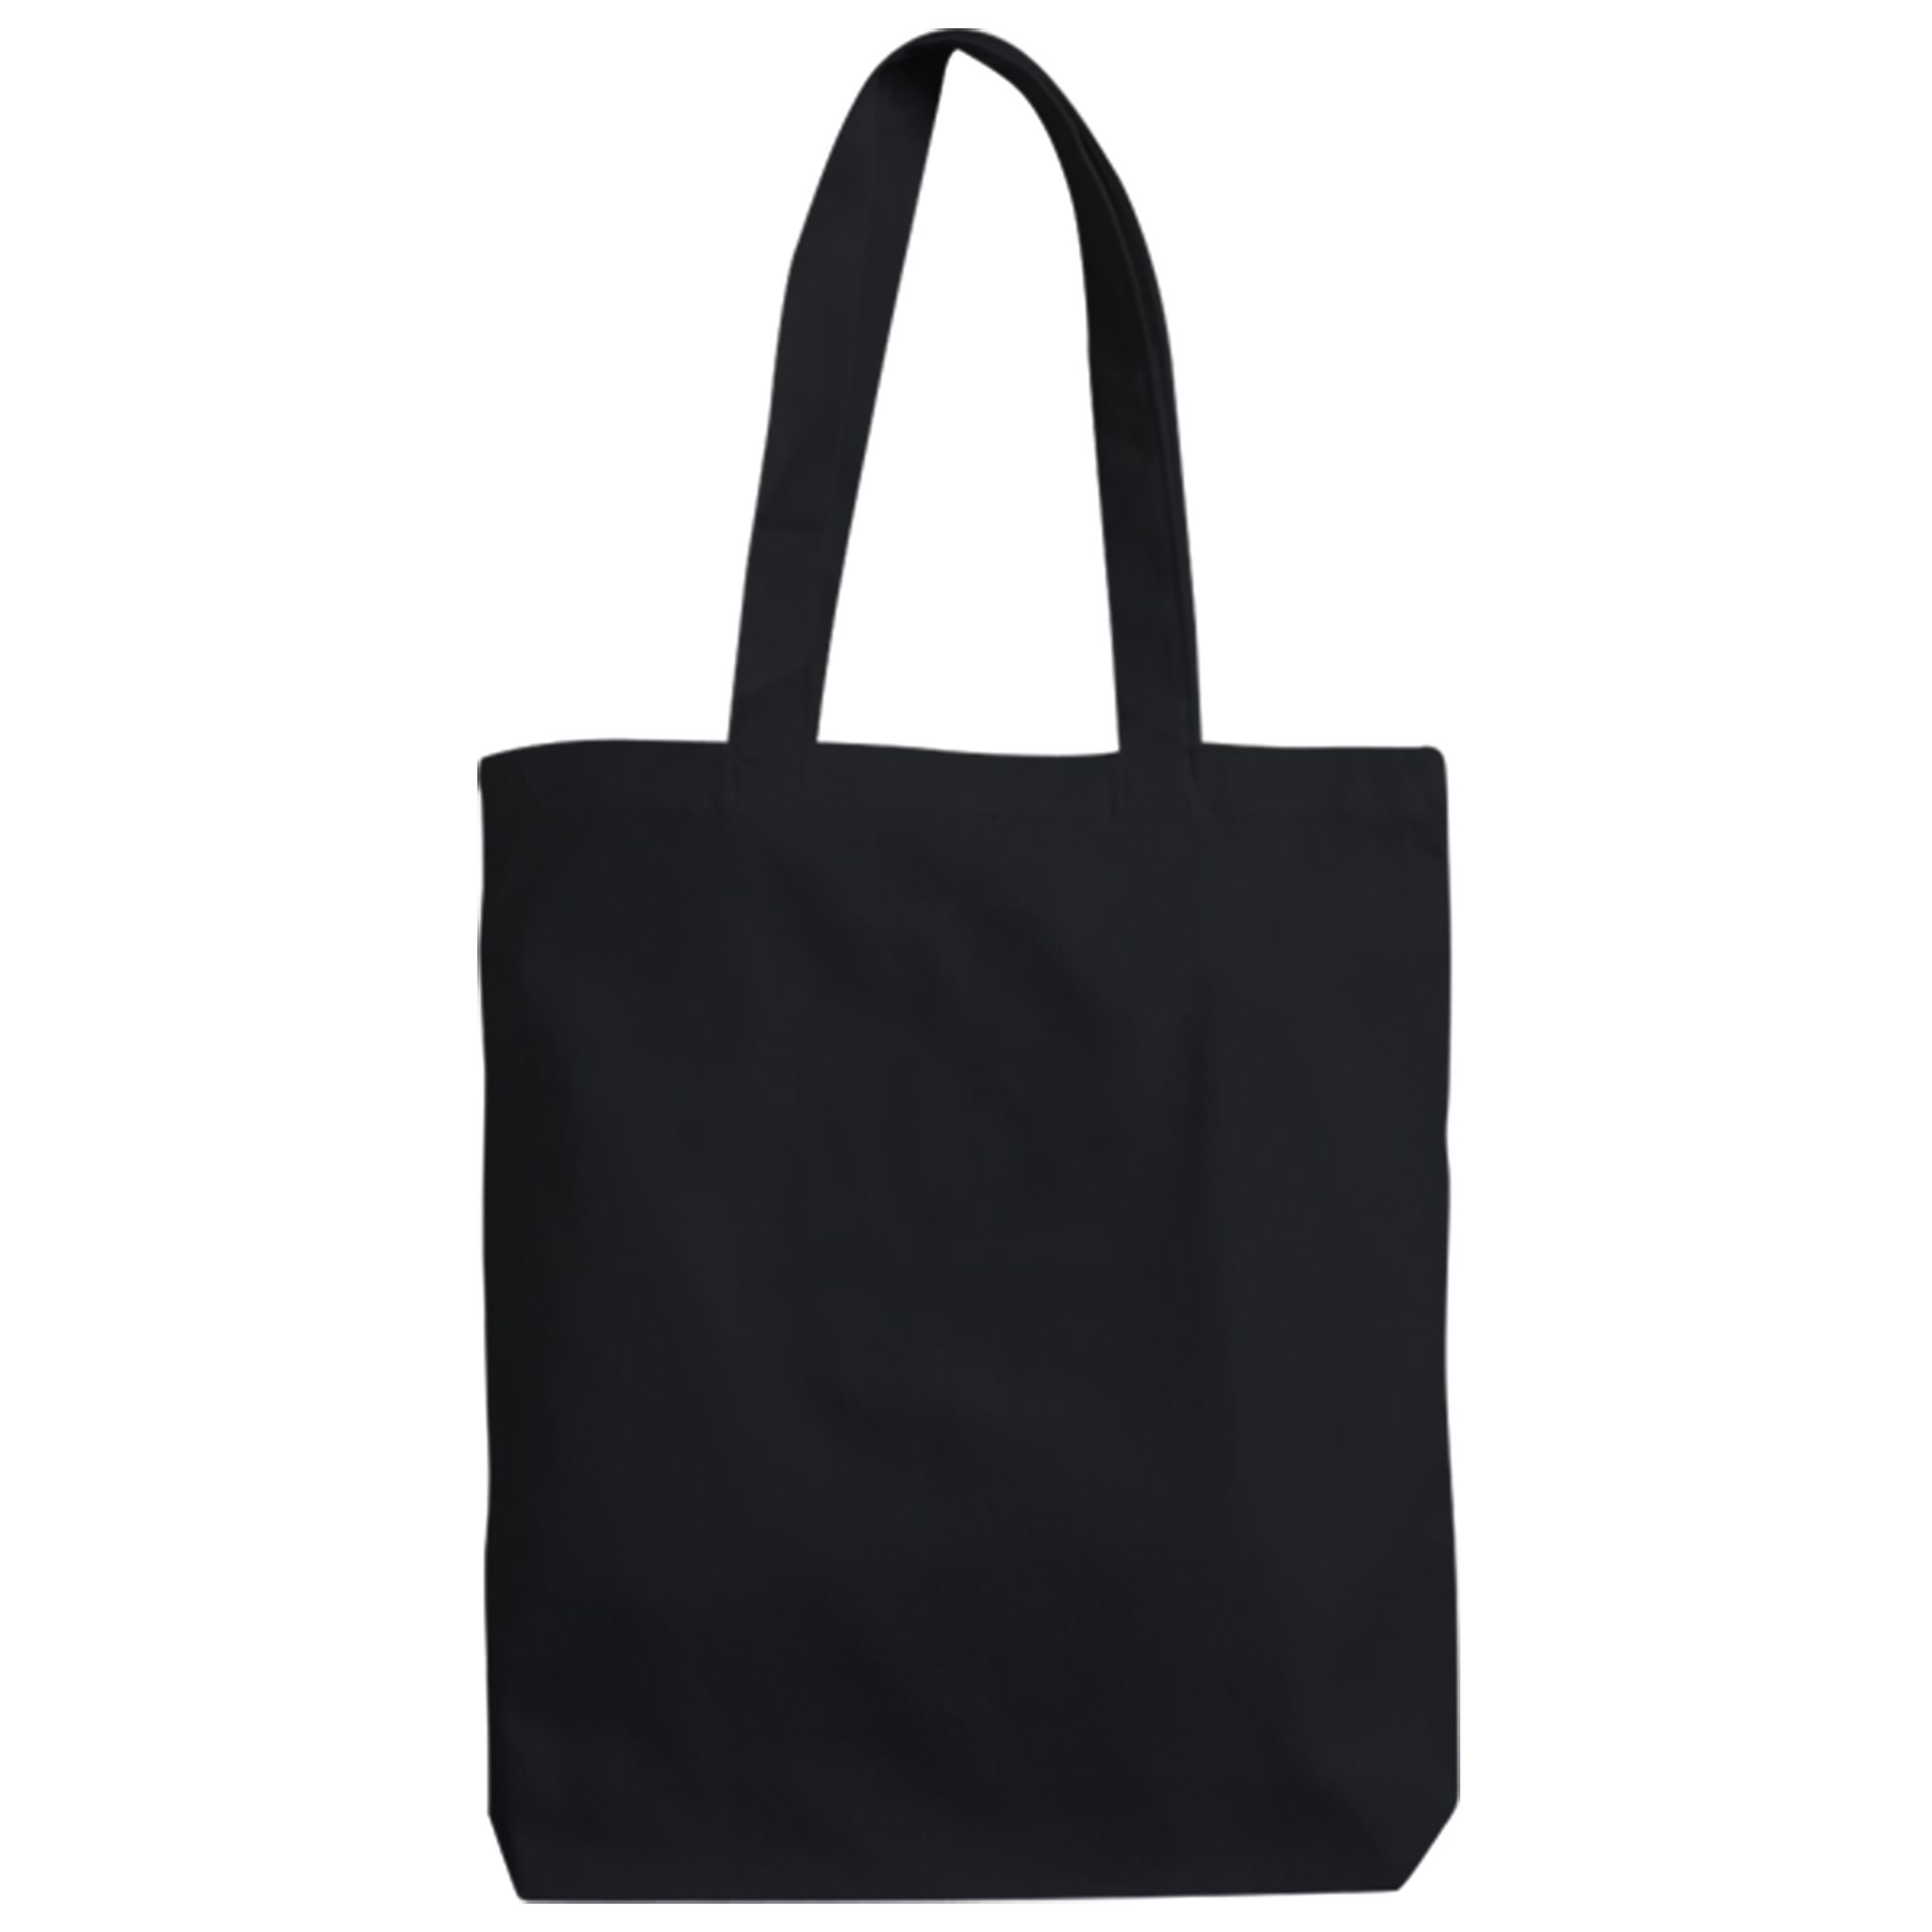 Canvas Bags Supplier | Customized Canvas Bag Printing Philippines ...